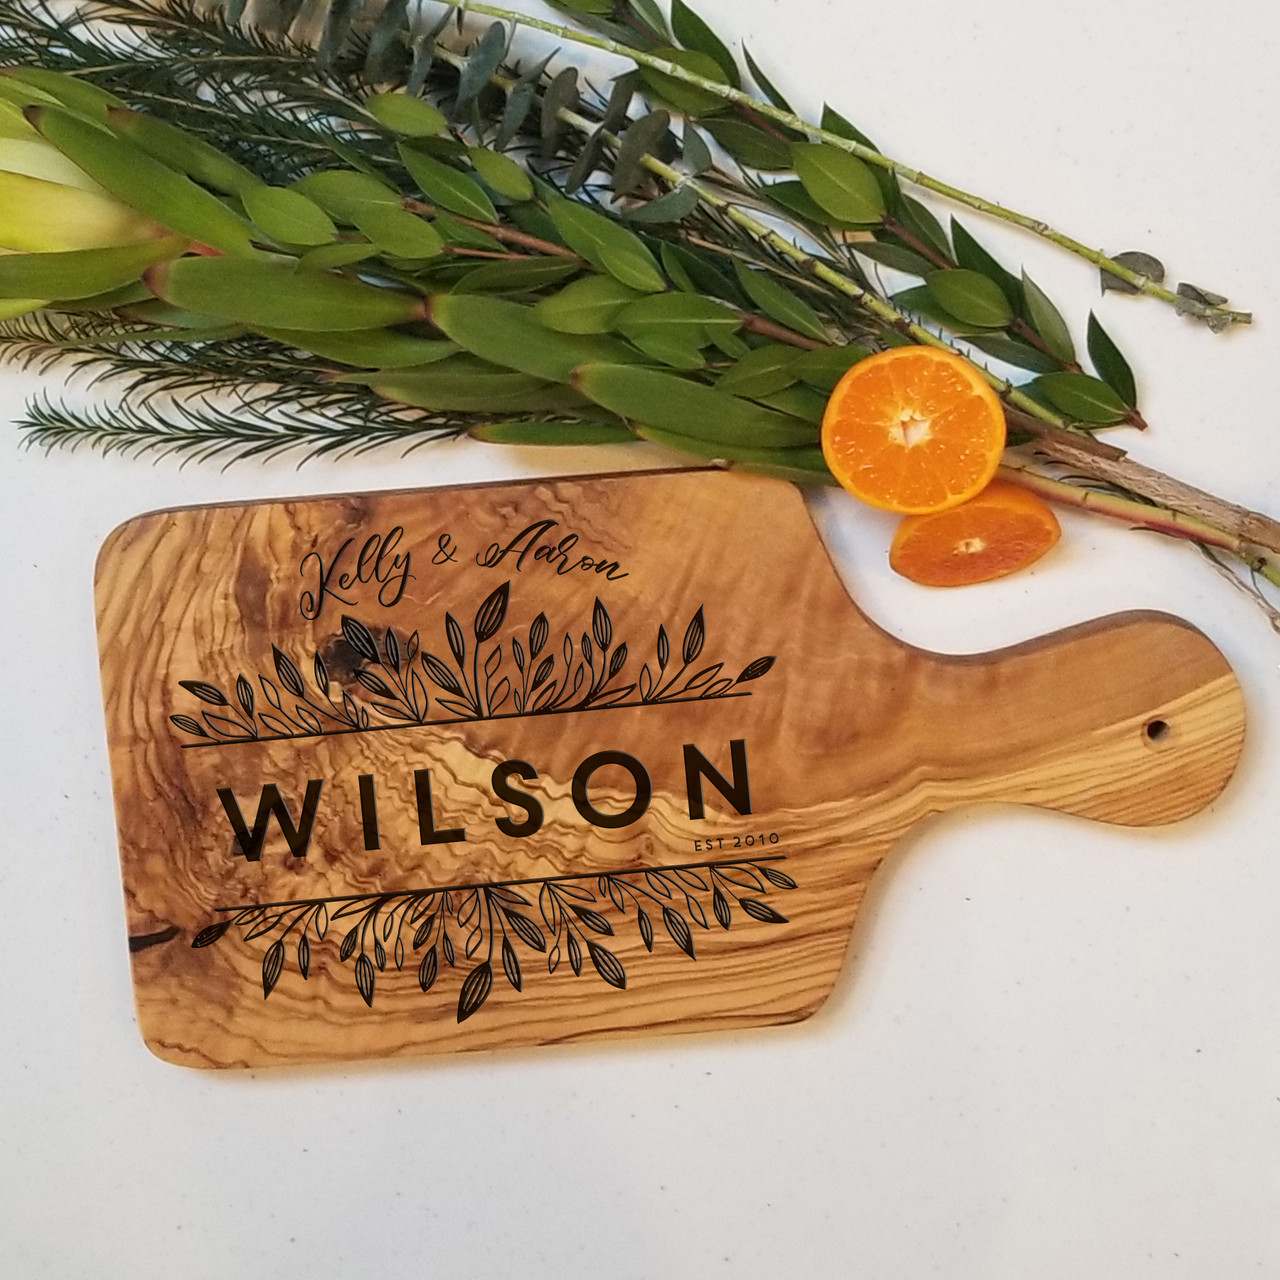 https://cdn11.bigcommerce.com/s-1ggeagg8hy/images/stencil/1280x1280/products/1013/2099/couple-last-name-floral-cutboard-blank-oliveboard-paddle__46685.1653344233.jpg?c=2?imbypass=on